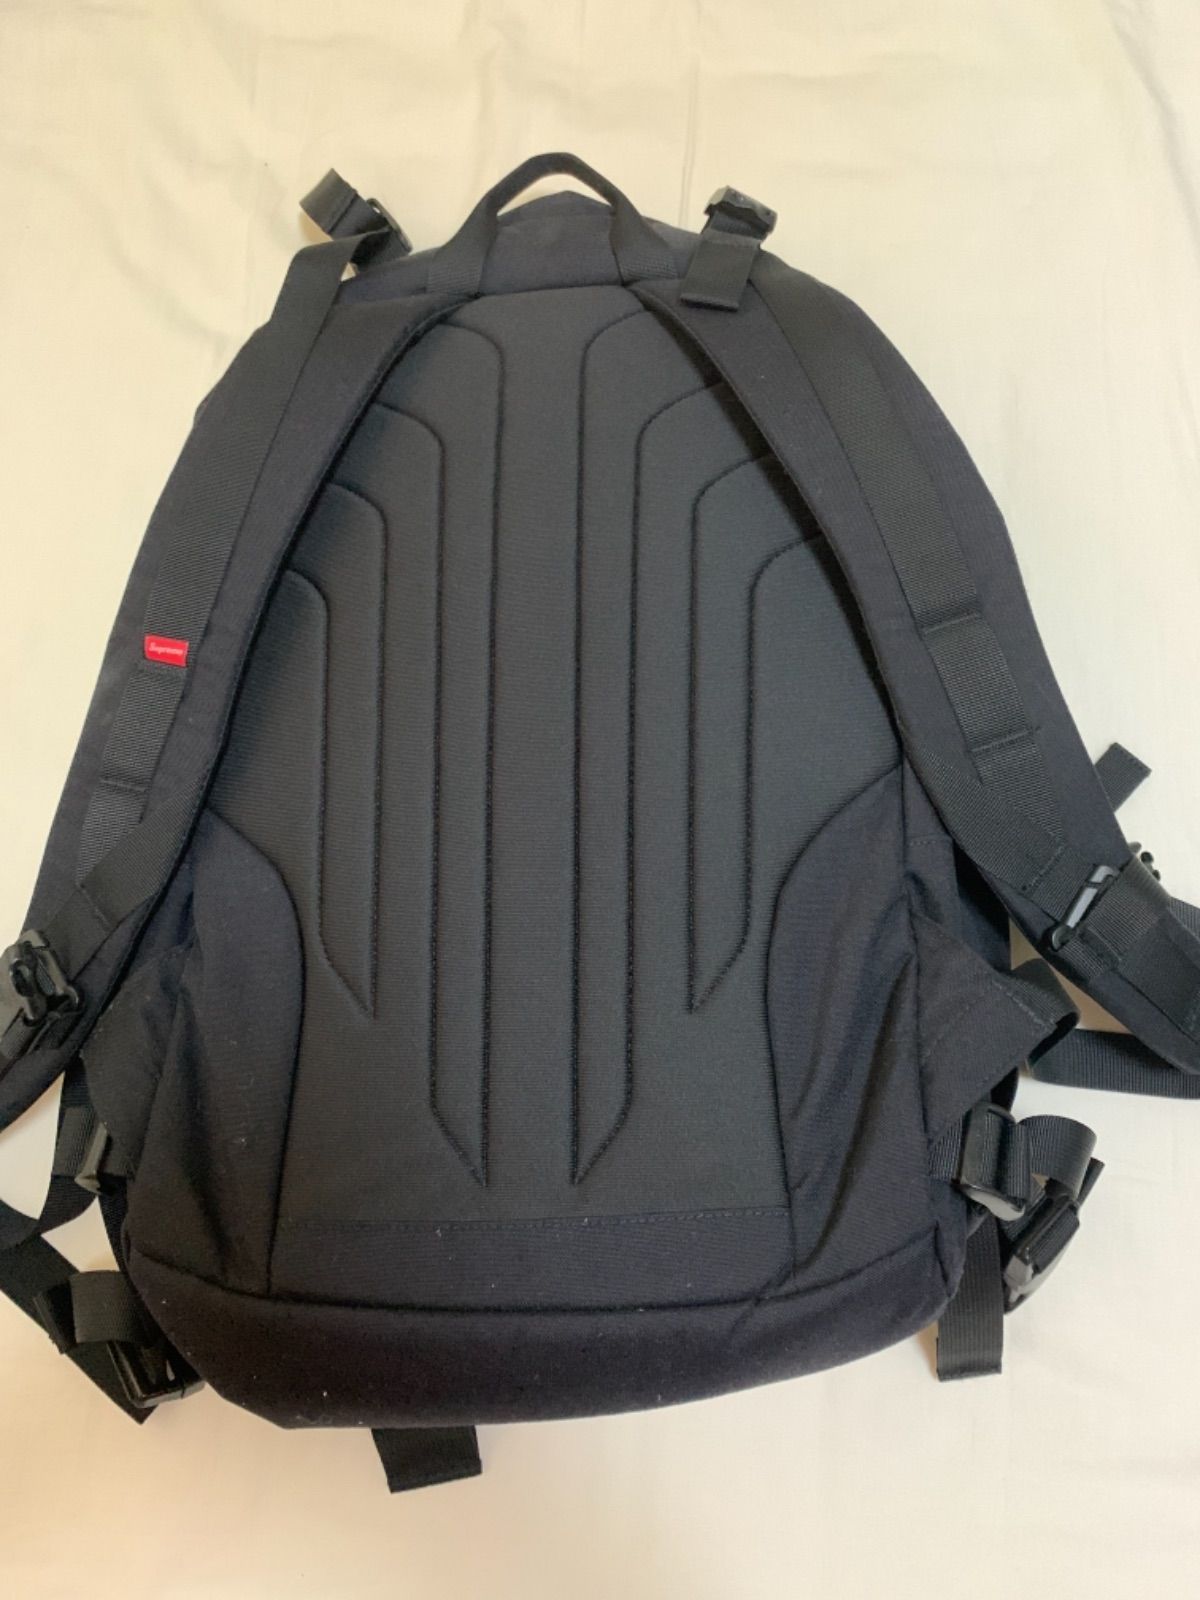 Supreme / The North Face RTG Backpack 黒 - メルカリ